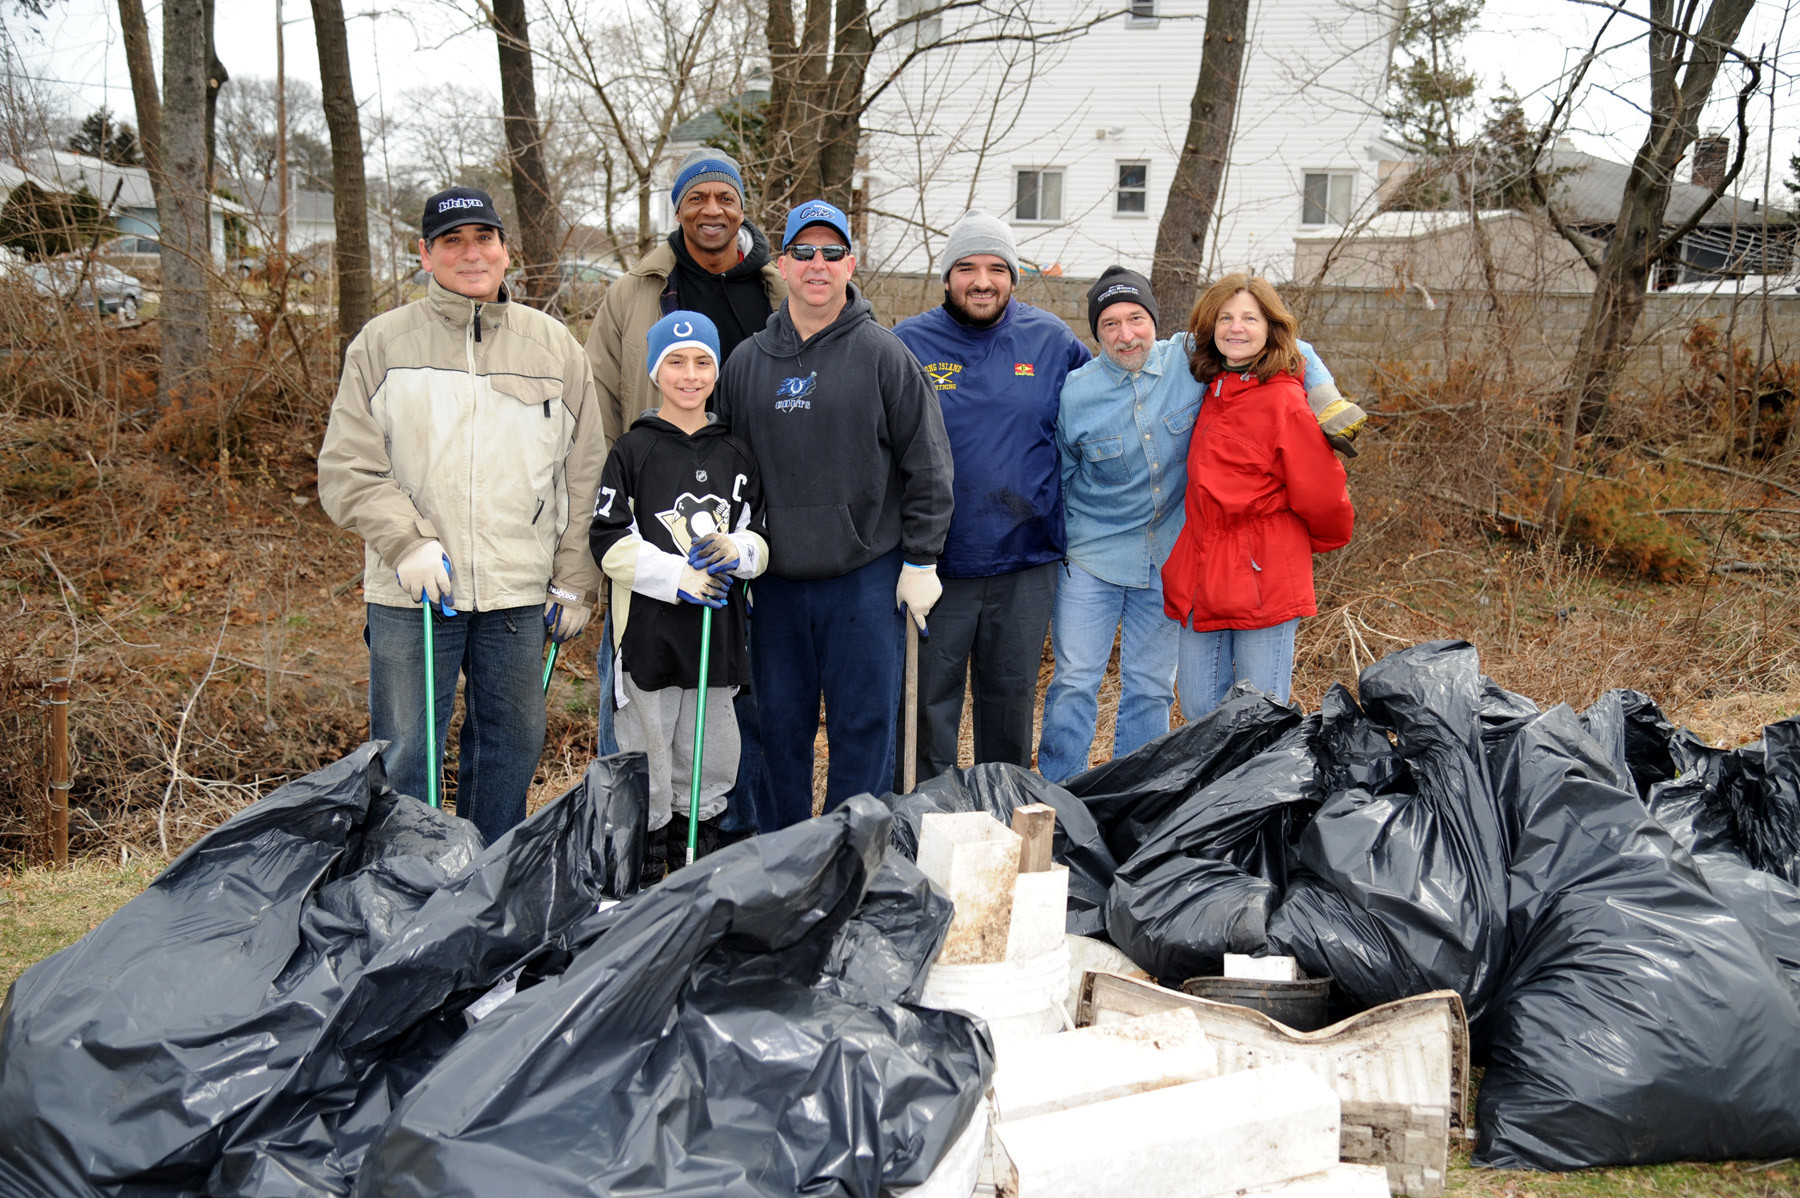 Several Valley Stream residents helped clean up a stream in North Valley Stream last Sunday morning. From Left are Nick Spaventa, Everett Gamory, Brian Milone, Victor Milone, David Sabatino, Bob and Joan Cesario.